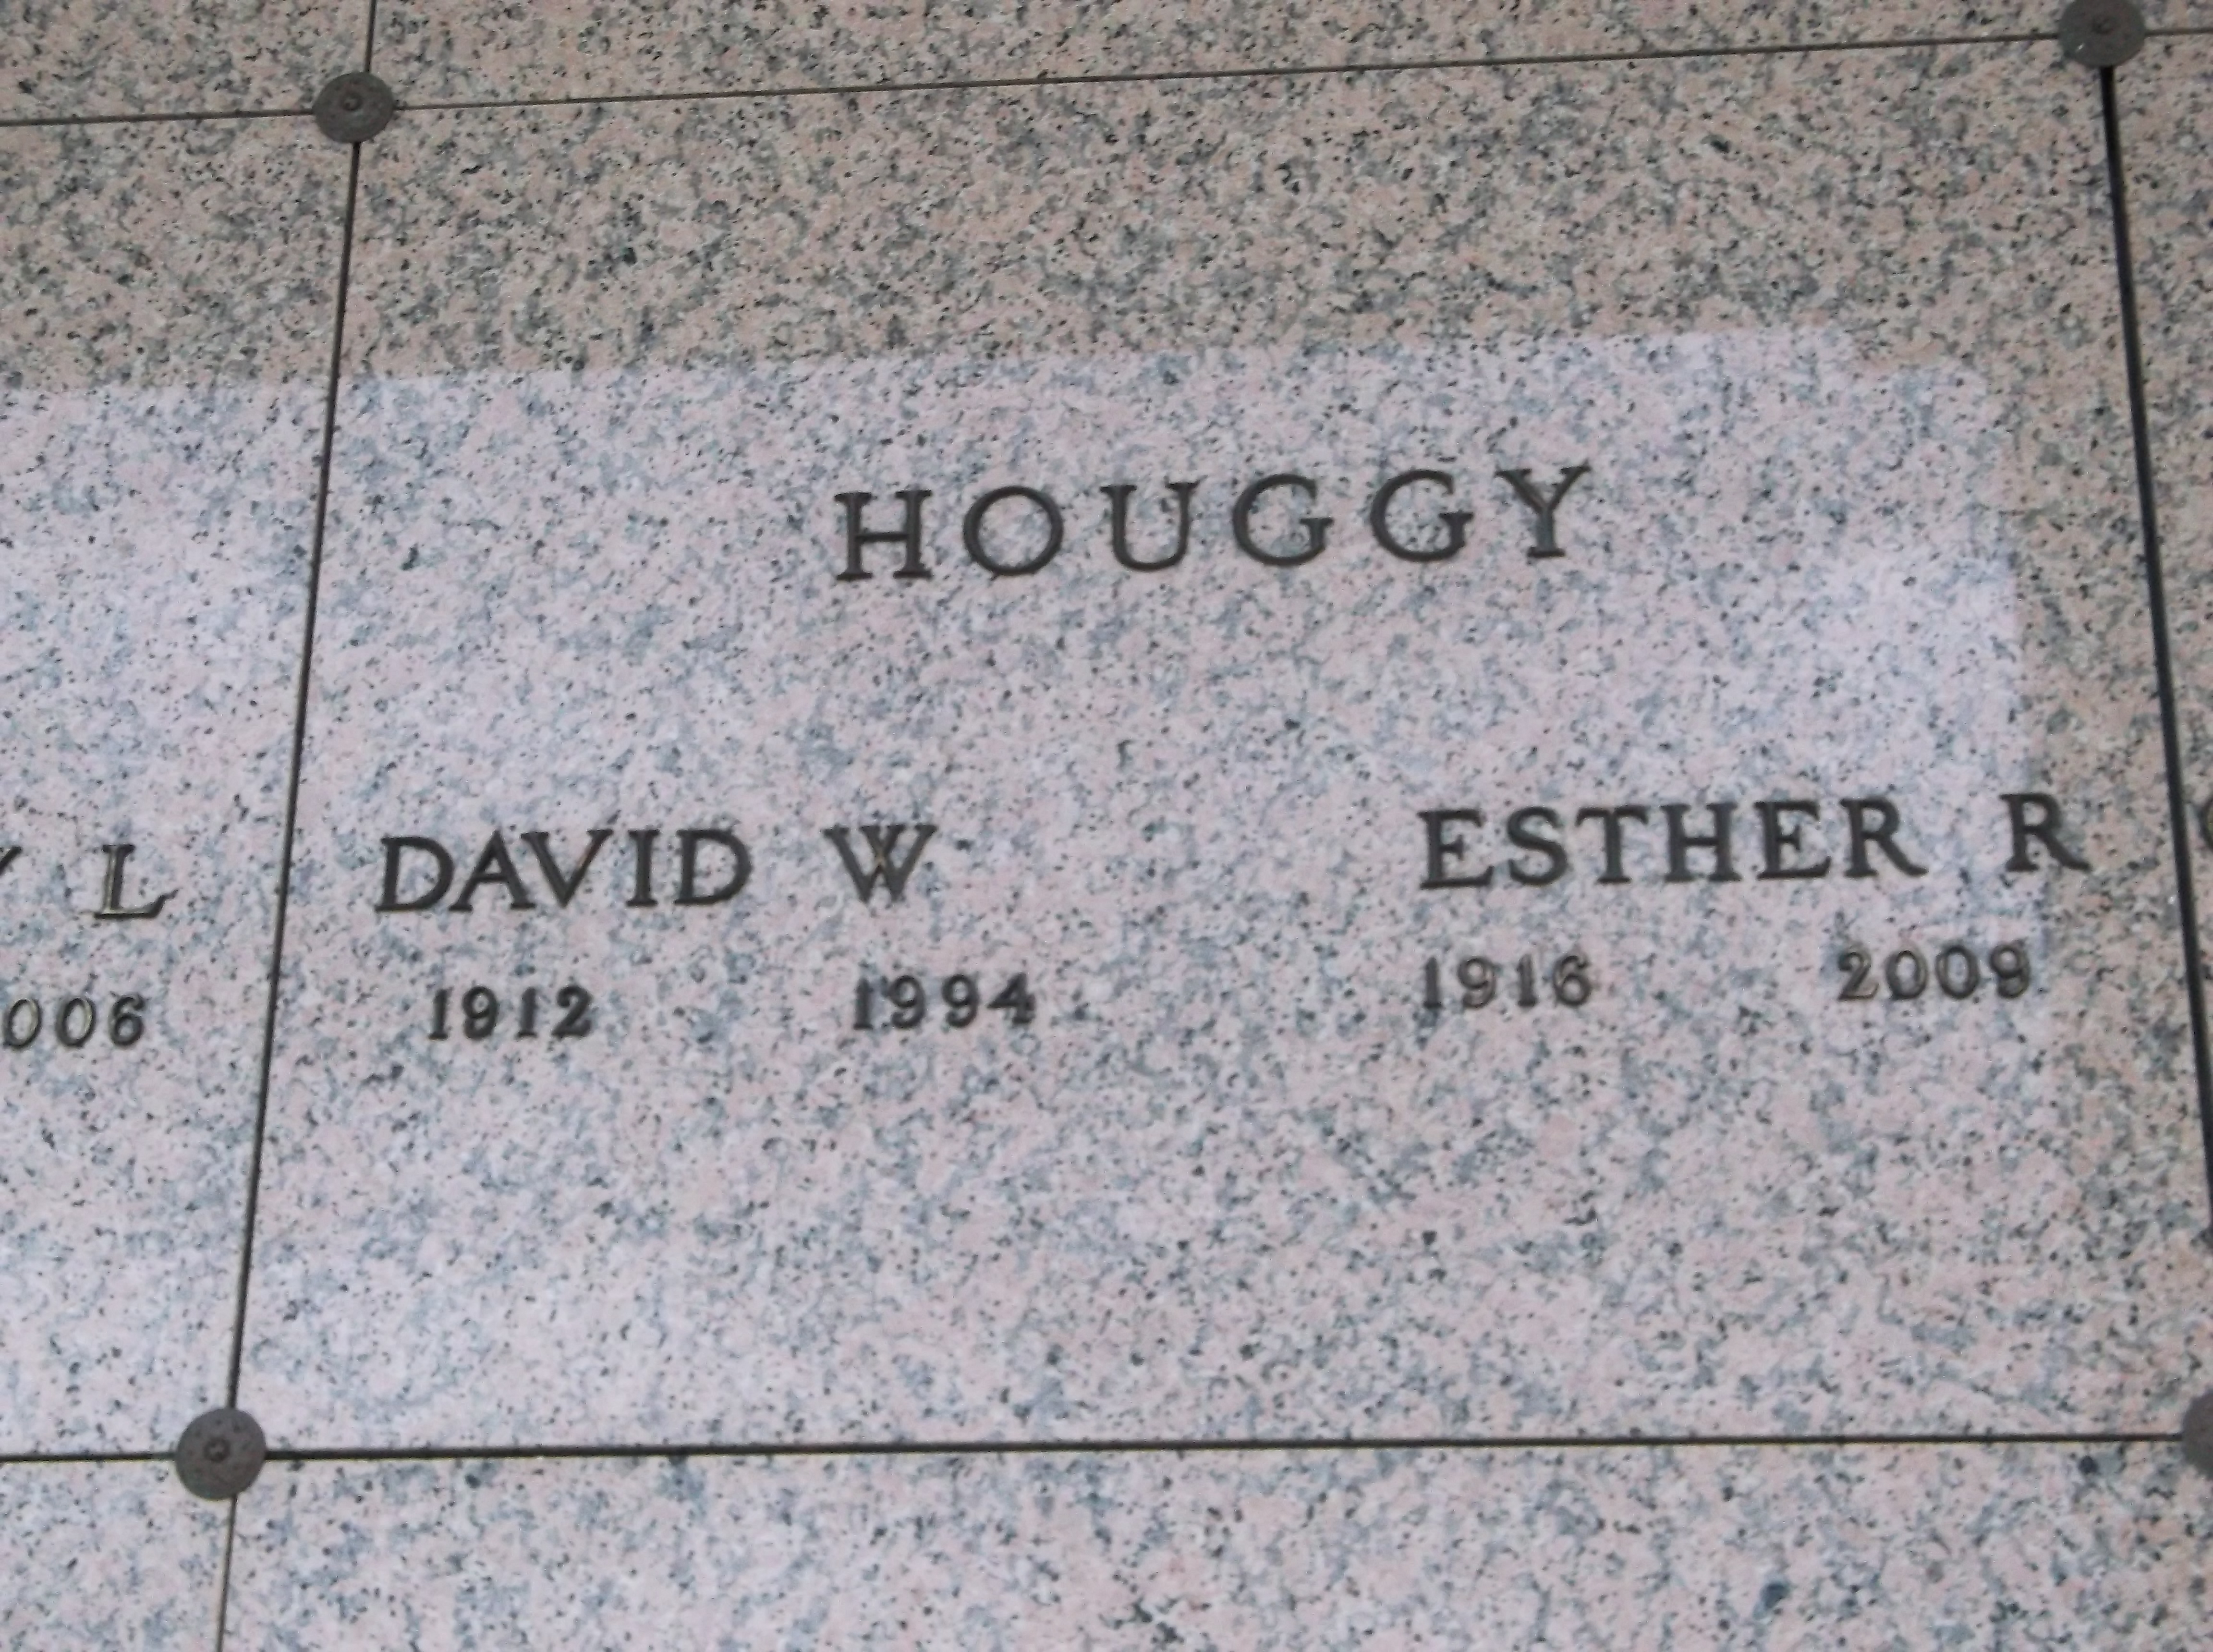 Esther R Houggy